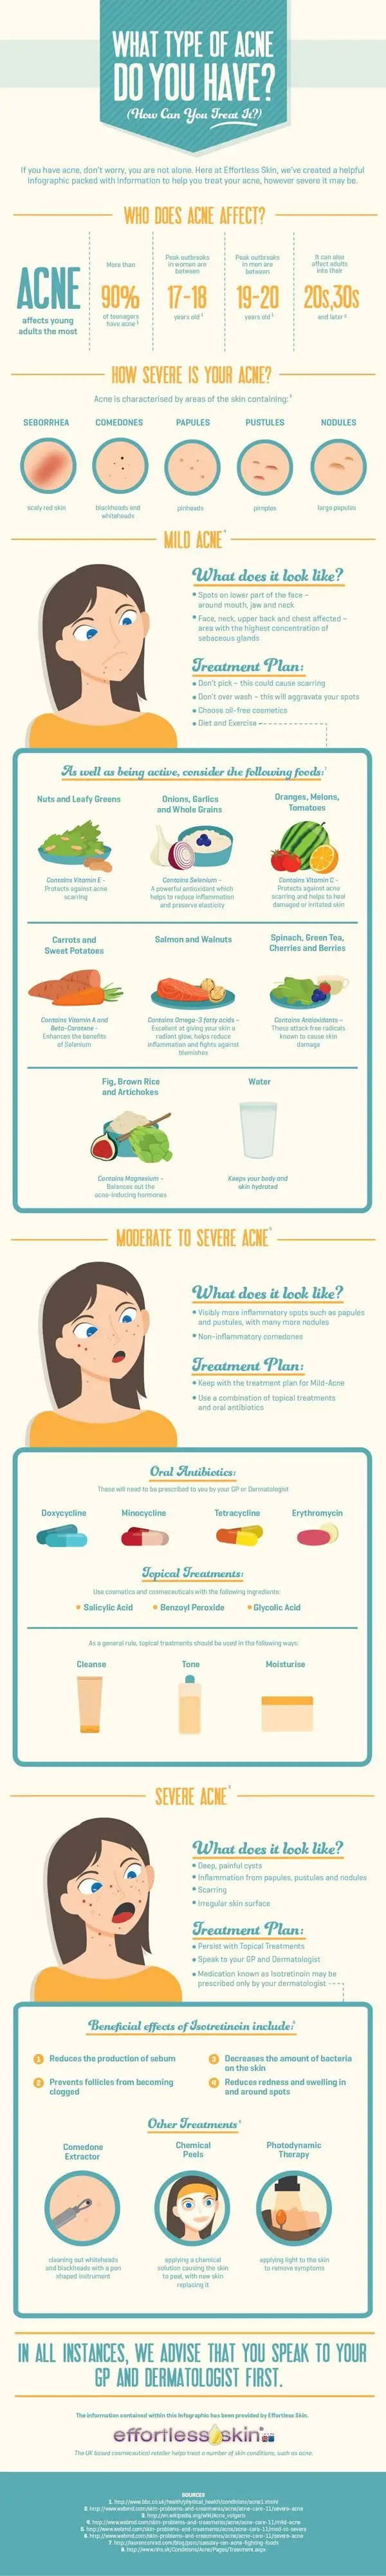 What Type of Acne do You Have?